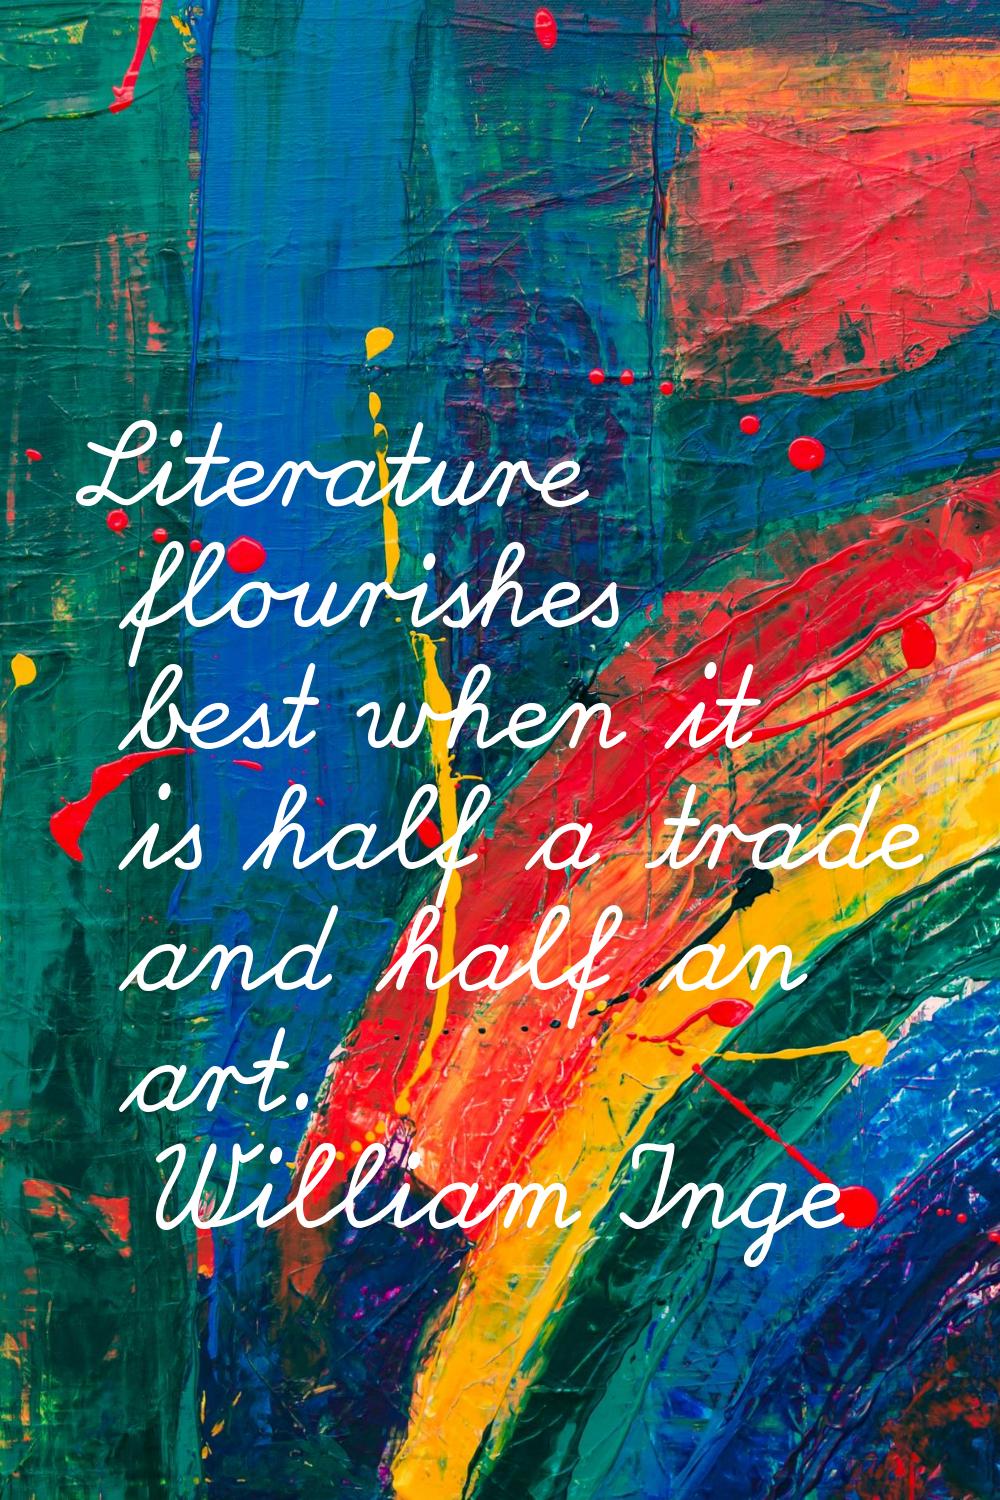 Literature flourishes best when it is half a trade and half an art.